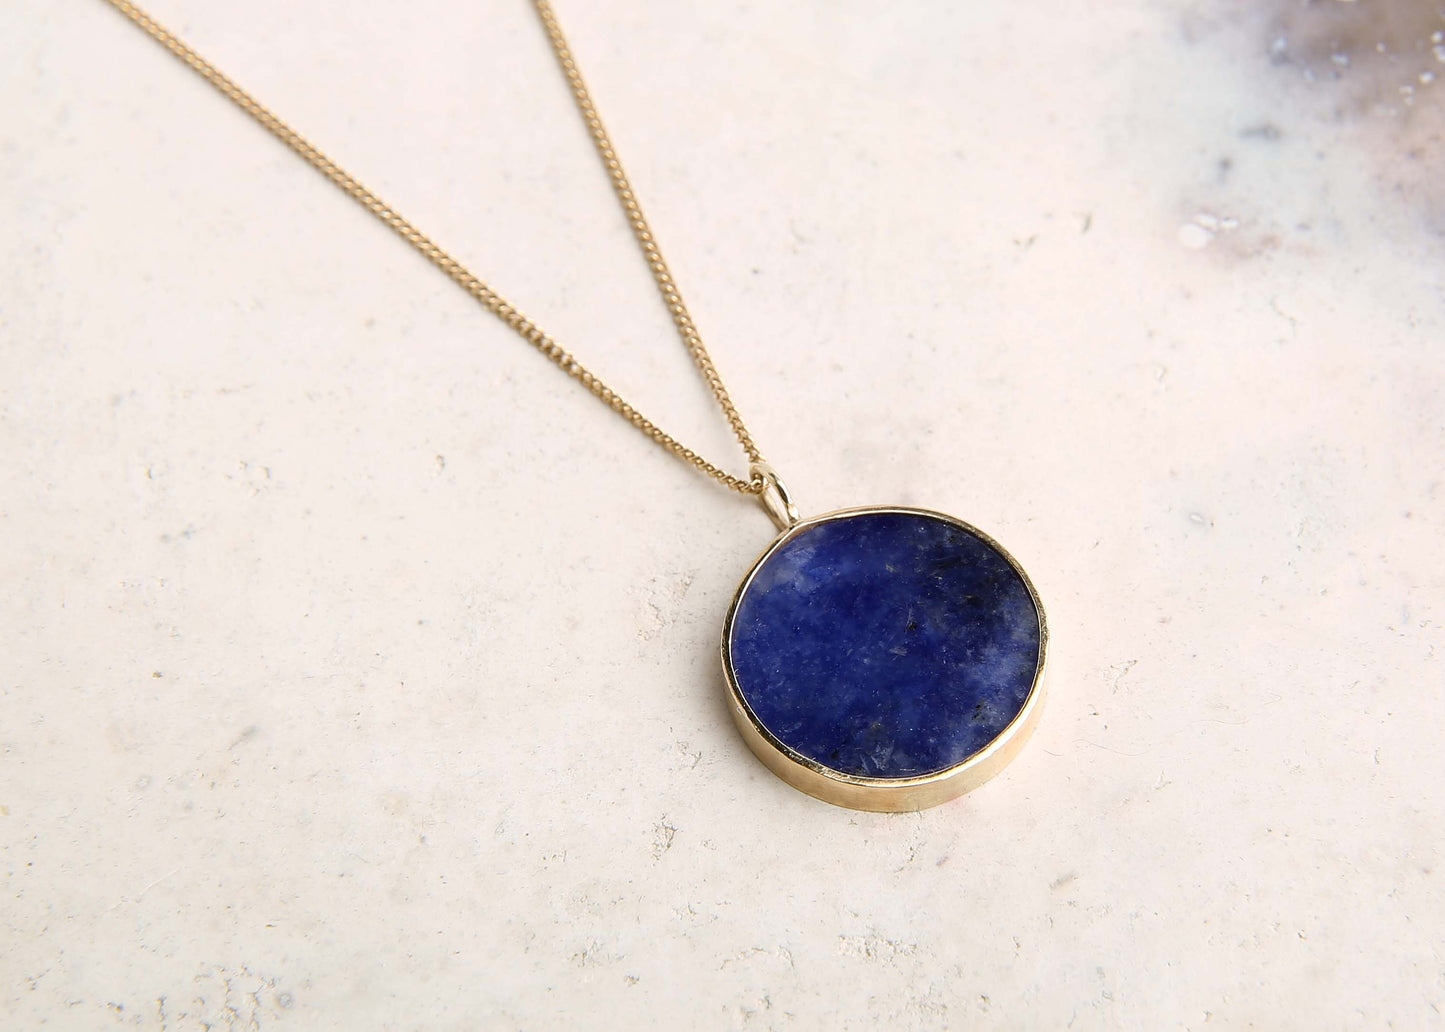 Blue lapis lazuli and gold pendant necklace on pink marble